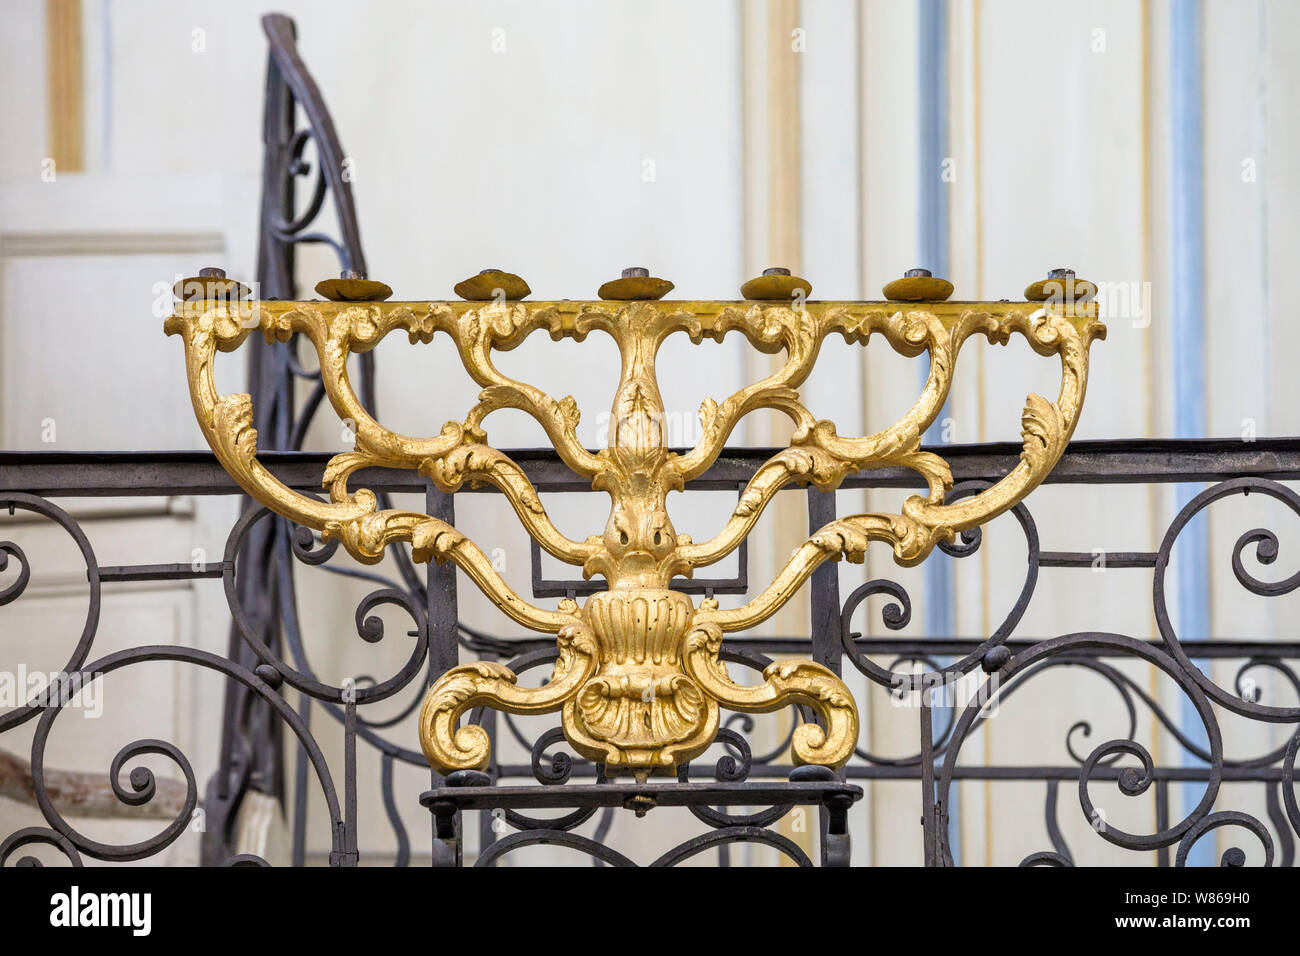 Cavaillon (south-eastern France): Synagogue of Cavaillon, masterpiece dating back to the XVIIIth century. Focus on a 7-branched candelabra Stock Photo